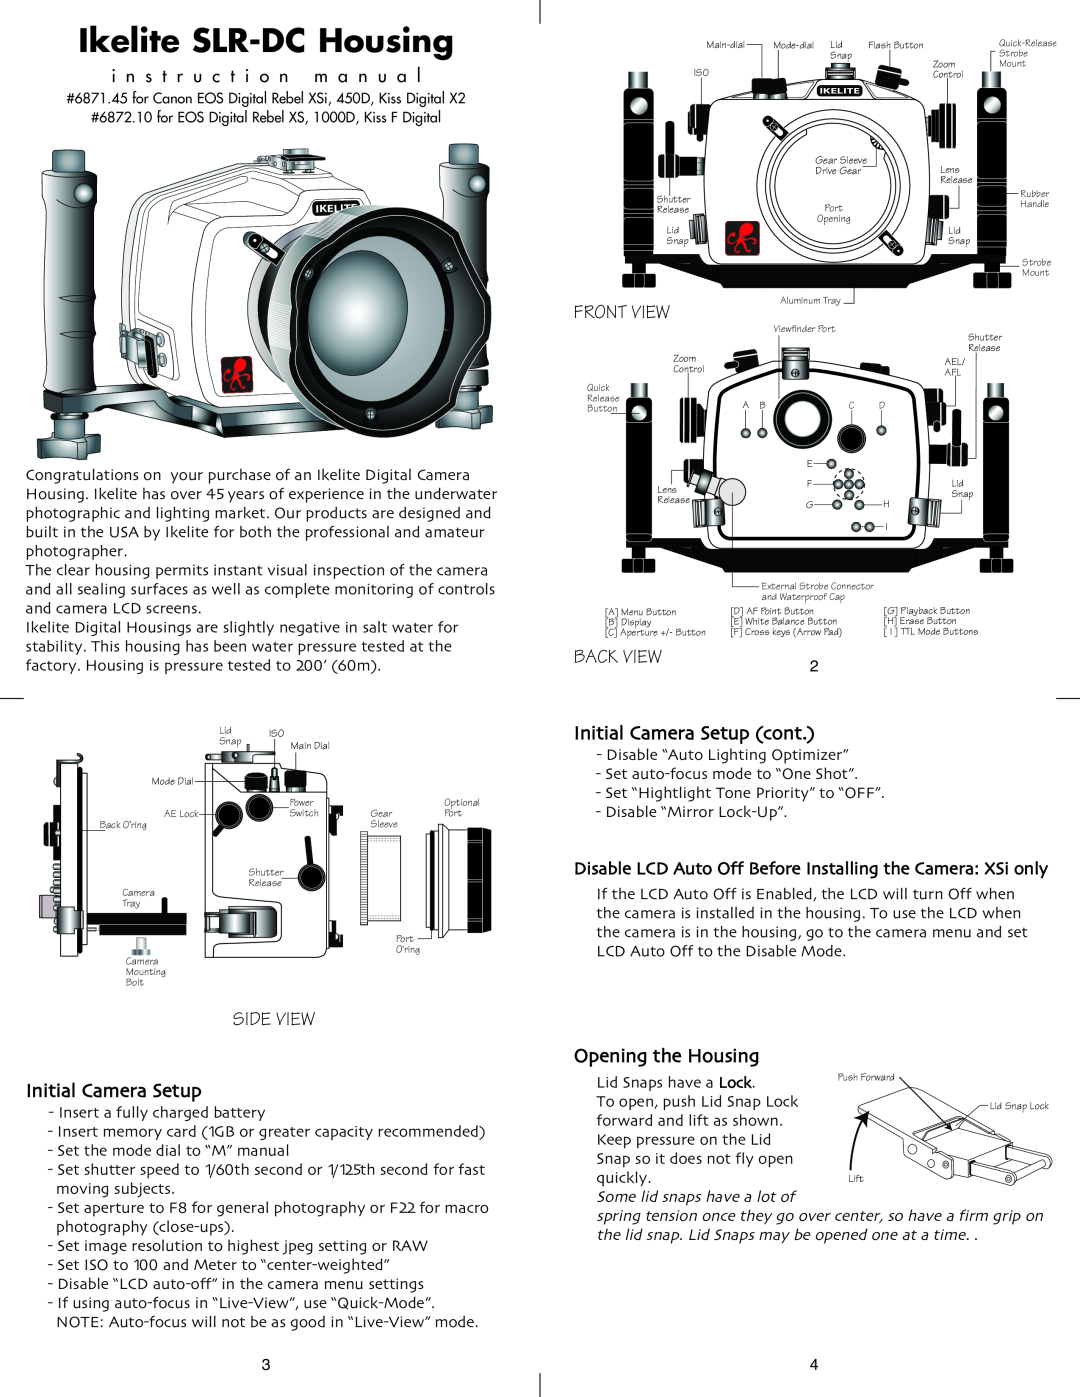 Ikelite 6871.45 instruction manual Front View, Back View, Initial Camera Setup cont, SIDE VIEW Initial Camera Setup 